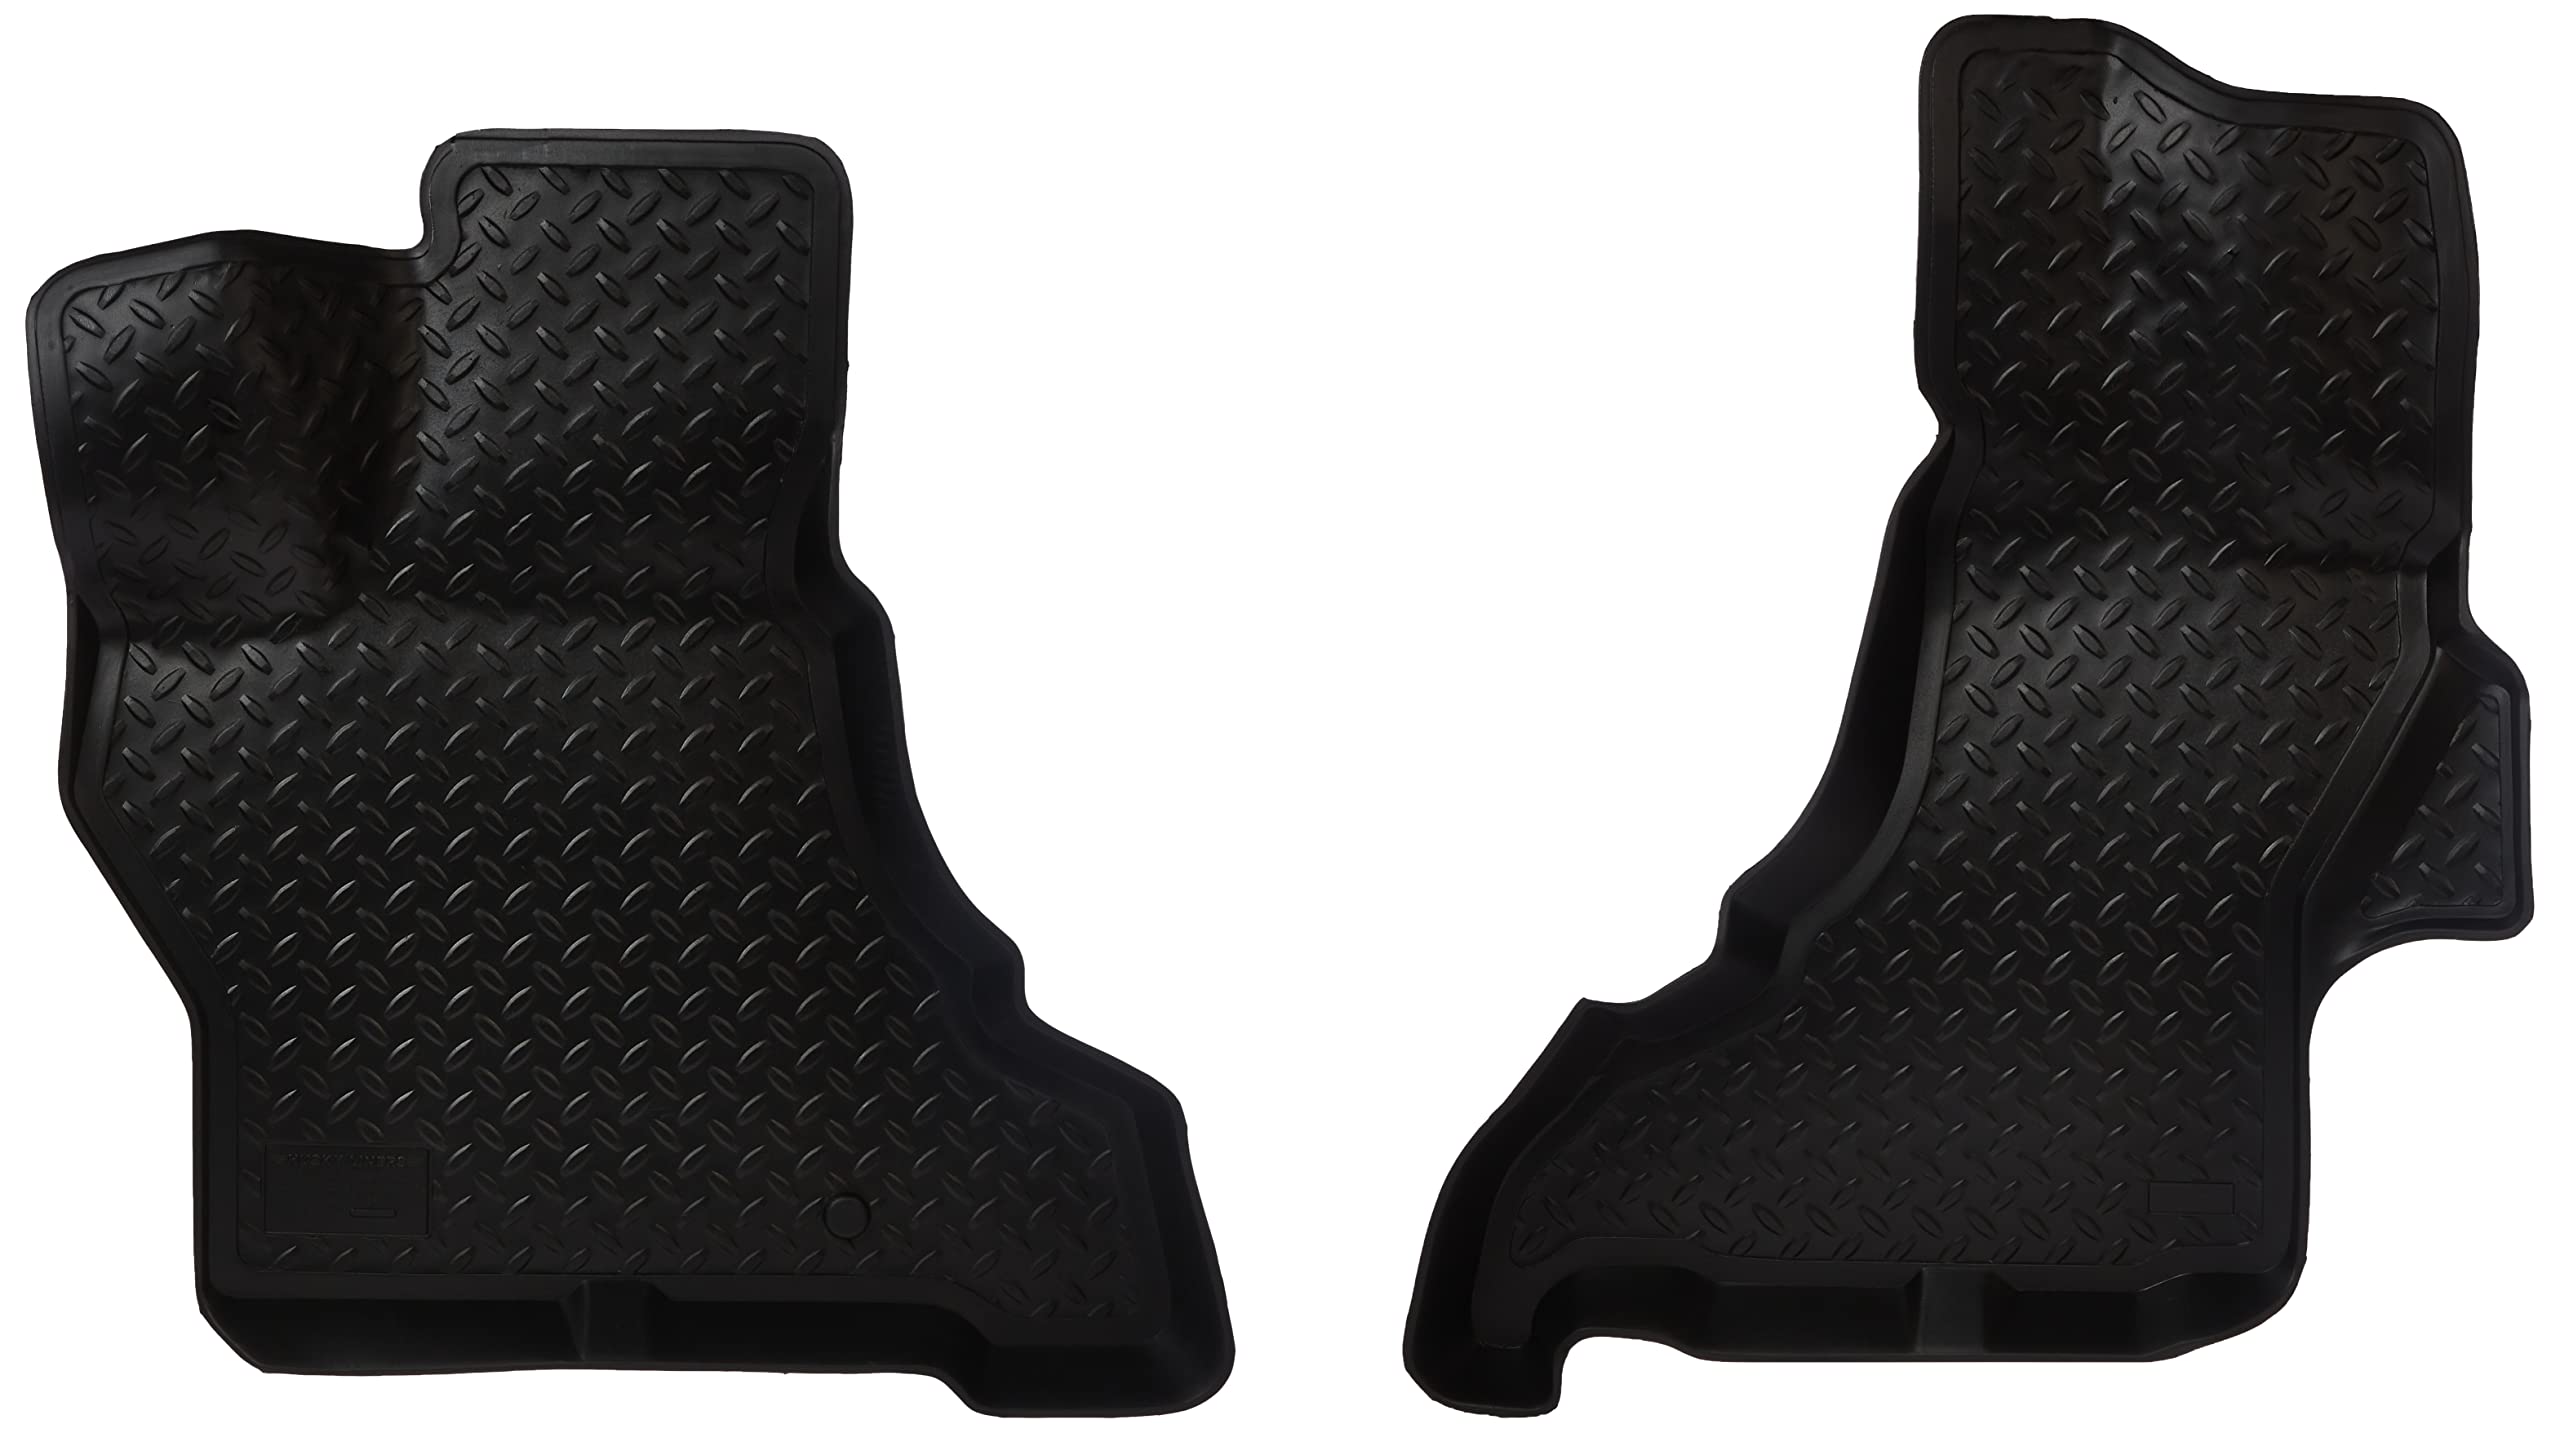 Amazon.com: Husky Liners Classic Style Series | Front Floor Liners - Black  | 33251 | Fits 2021-2022 Ford E-350/E-450 Super Duty, 2003-2019 Ford E-350  Super Duty, 2003-2014 Ford E-150/E-250, and more 2 Pcs : Automotive